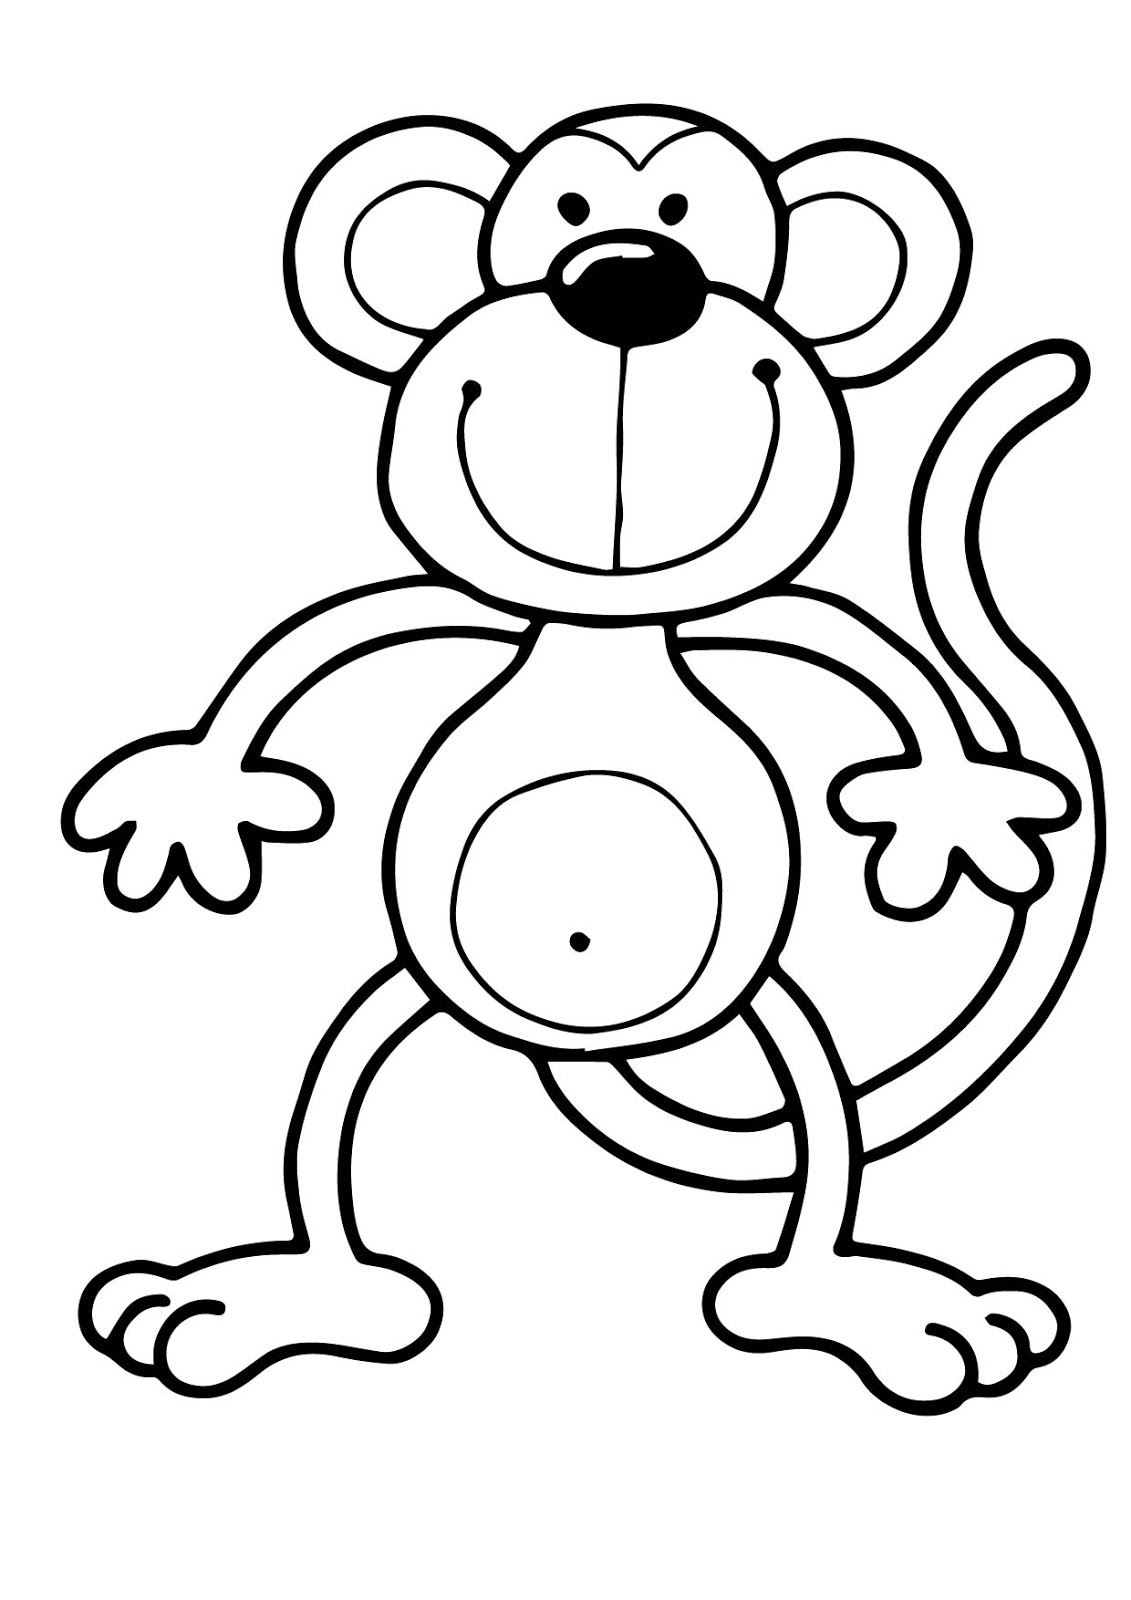 coloring page monkey monkeys drawing at getdrawingscom free for personal use coloring monkey page 